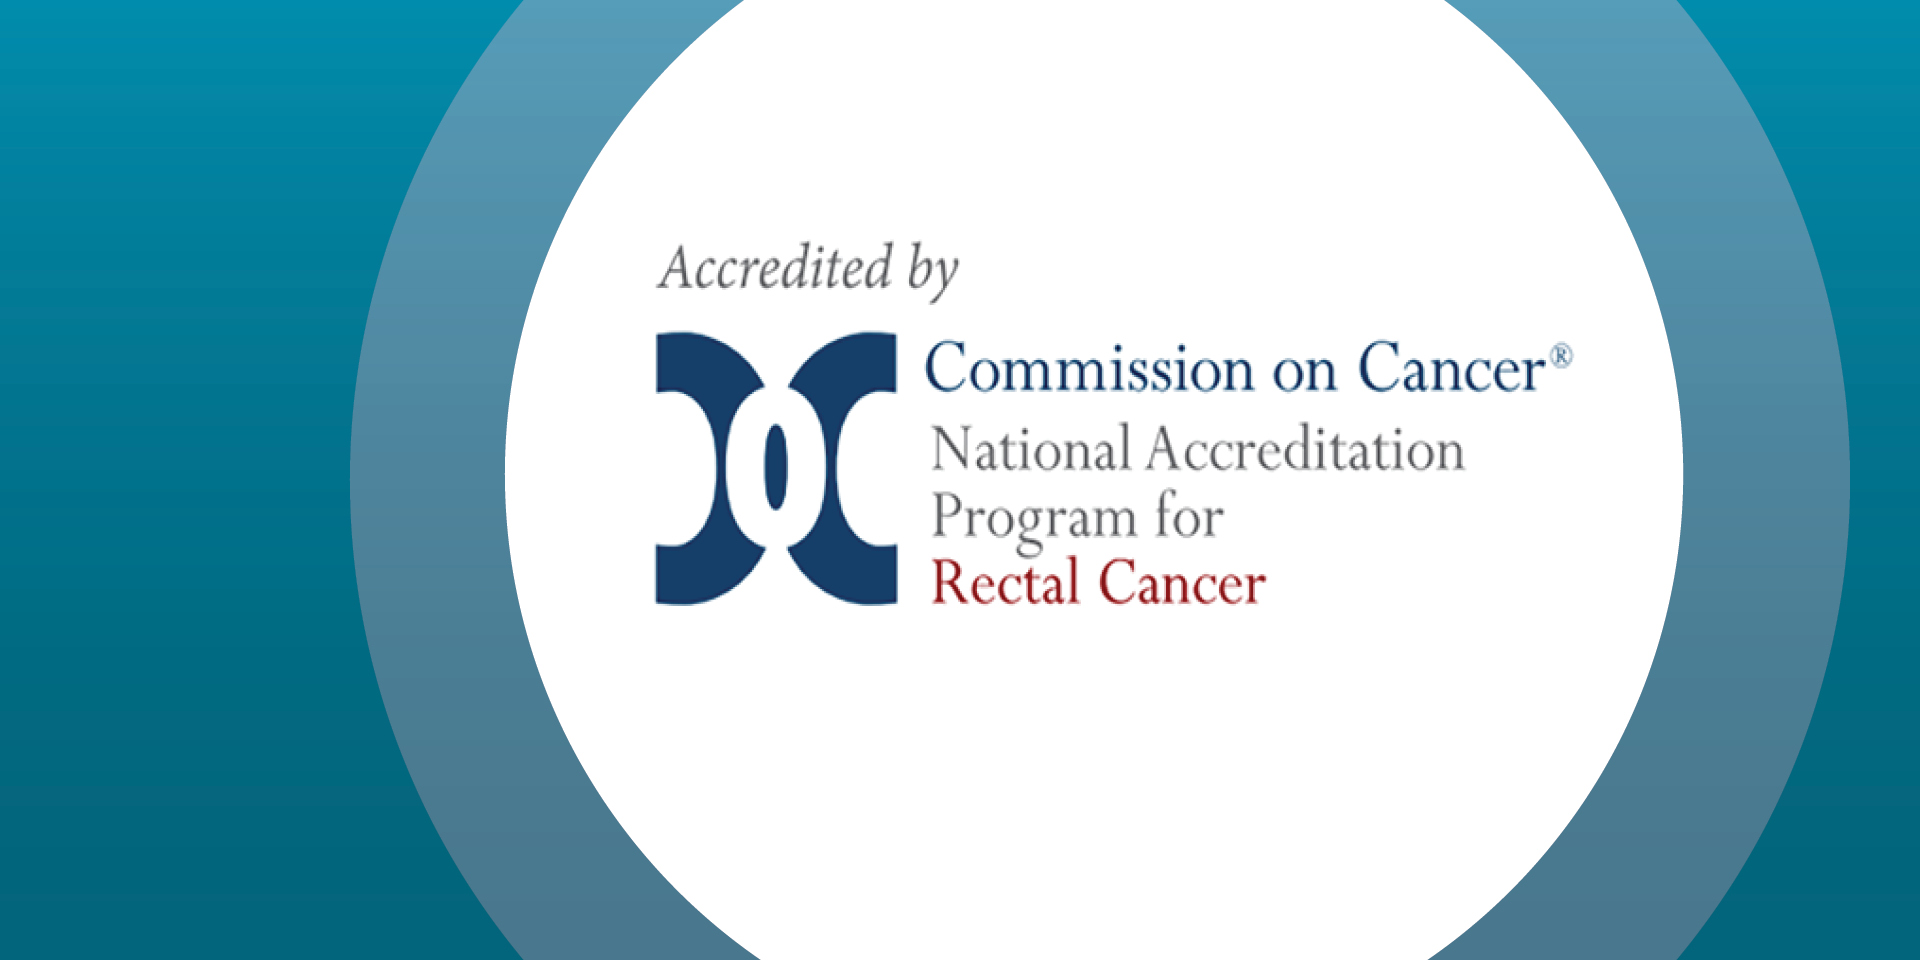 Doylestown Hospital Earns 3-Year Accreditation from the National Accreditation Program for Rectal Cancer of the American College of Surgeons | Doylestown Health